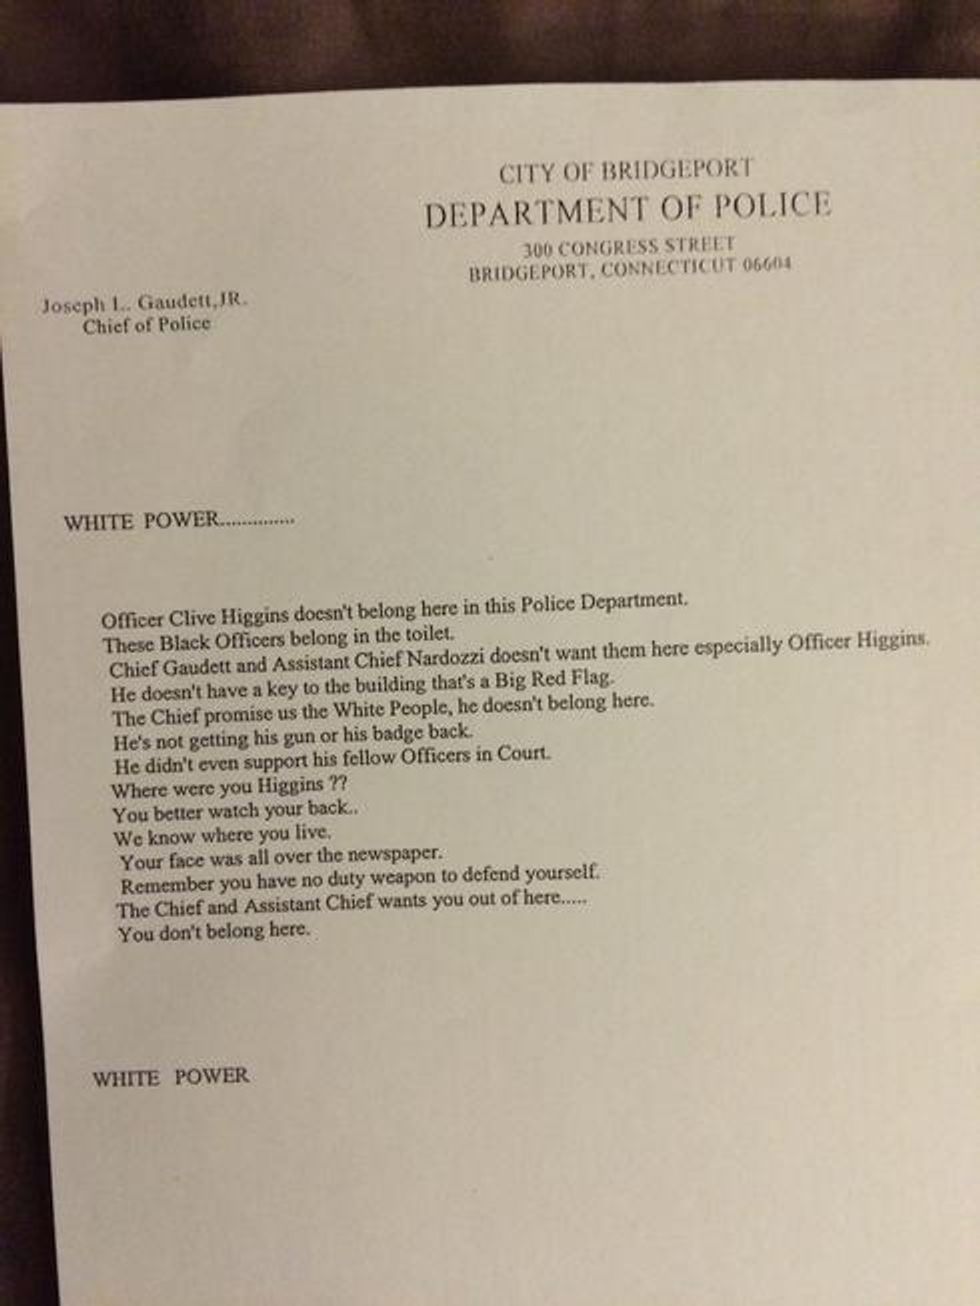 Racist Note Is Circulated at Conn. Police Dept. — and Cops Think It's Authored by One Of Their Own